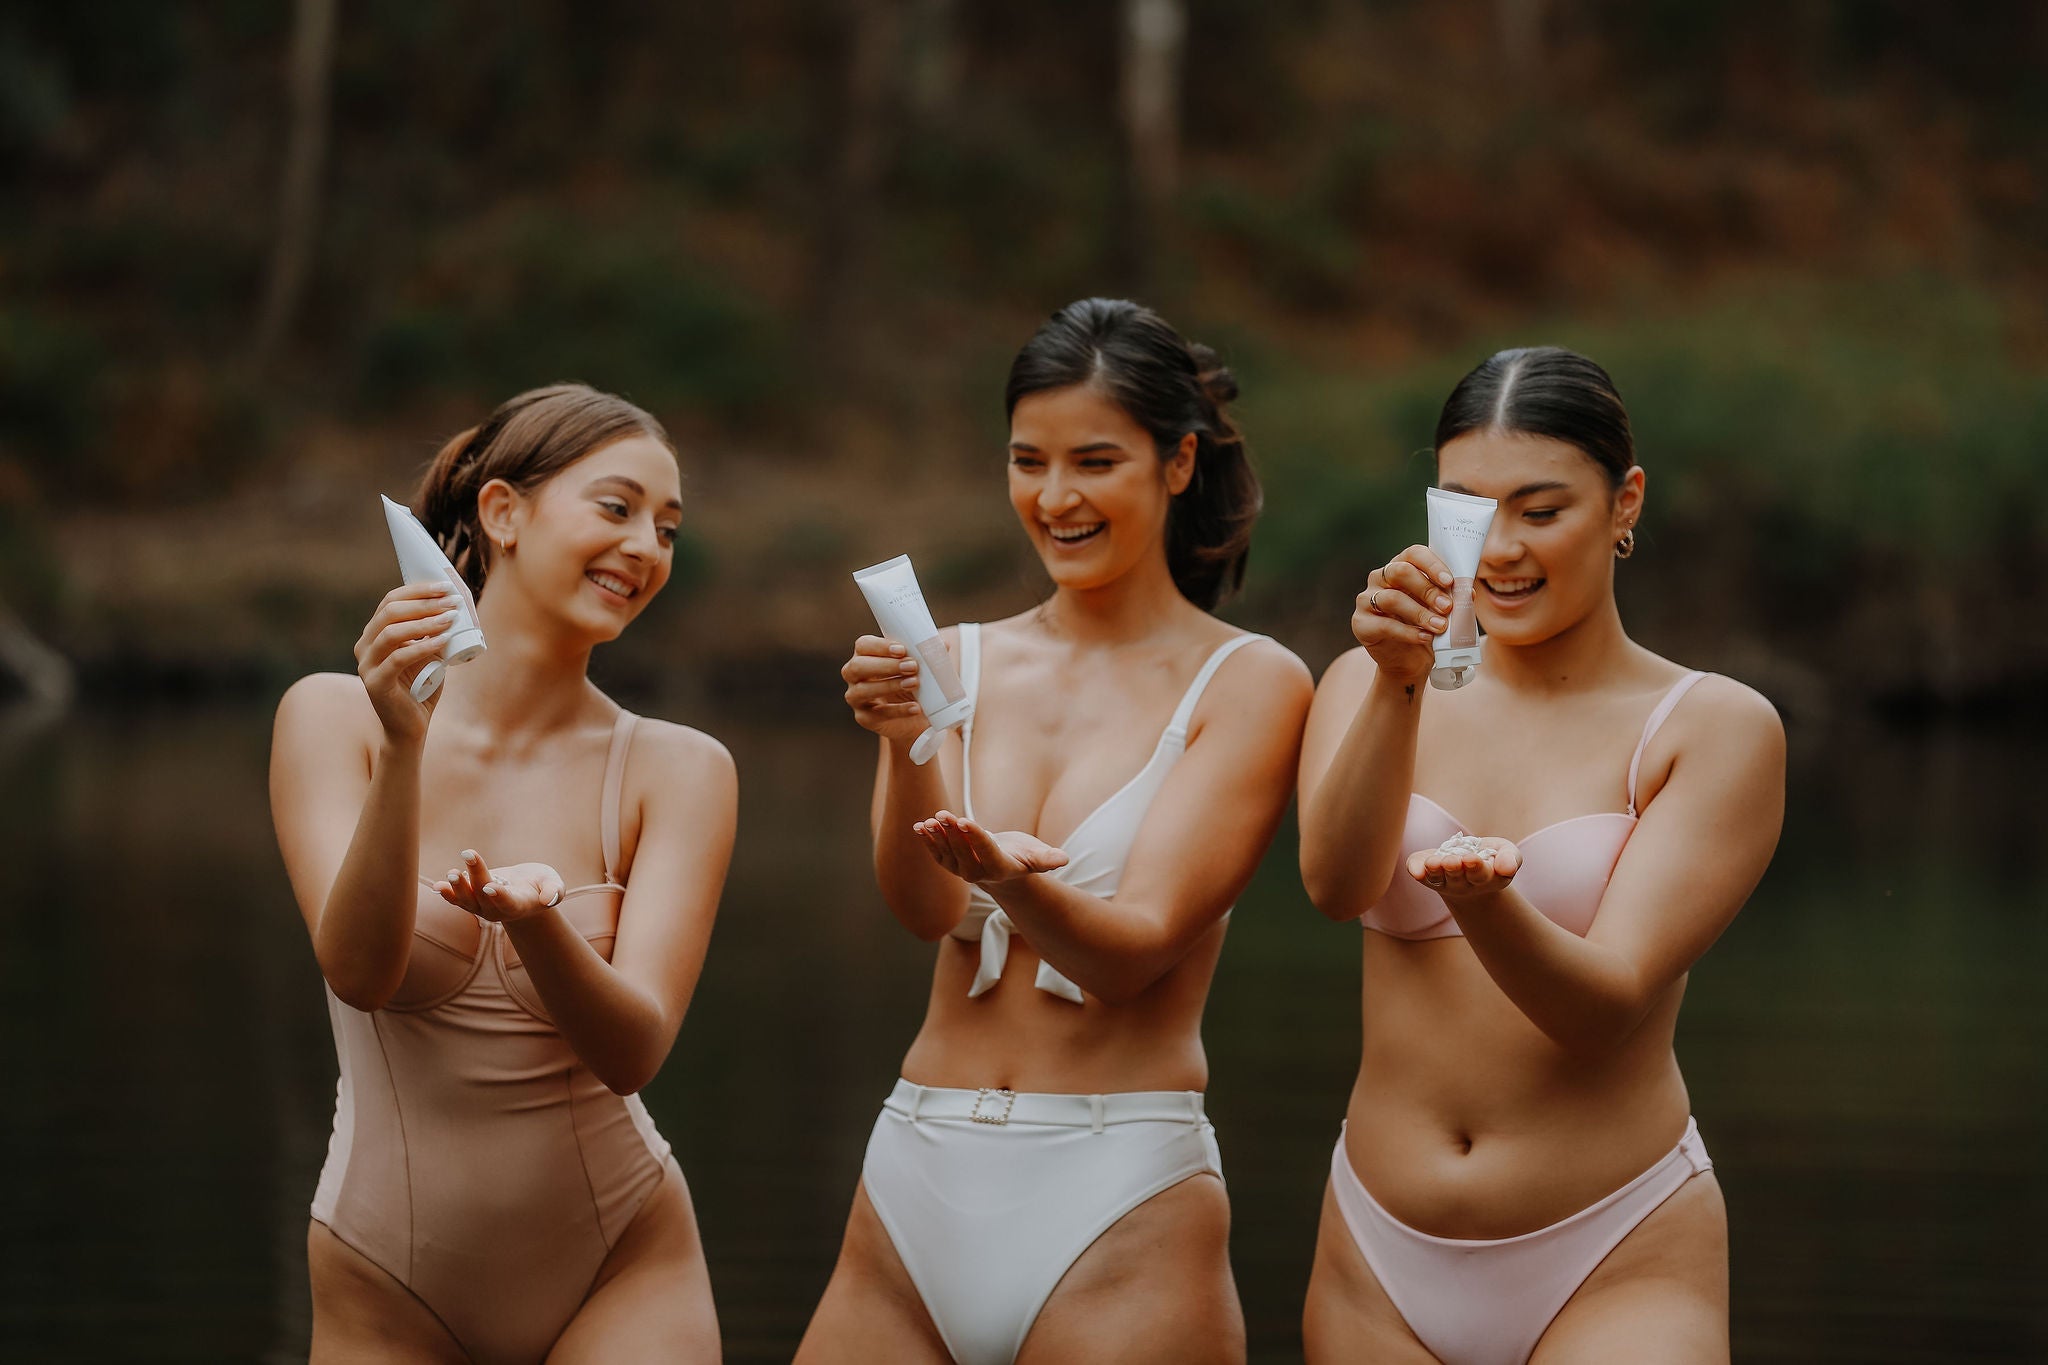 three models holding a tube of wild fusion skincare facial polish. they are smiling and squirting product into their hands. dwellingup forest and lake in background